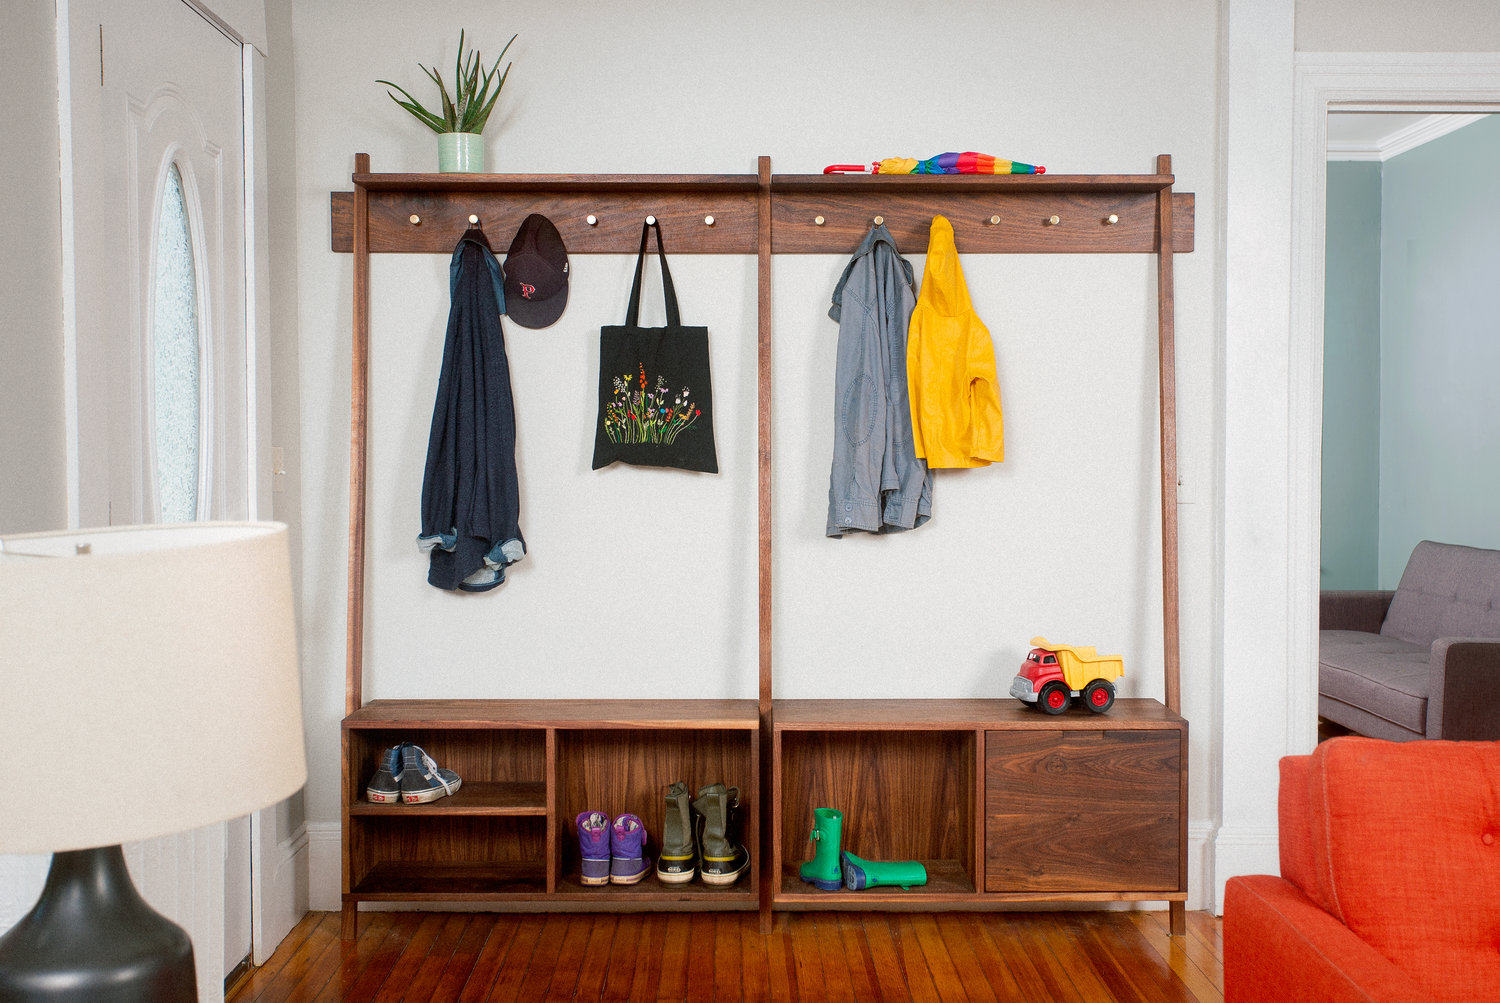 A coat hanger and storage bench transform the entryway into a mudroom